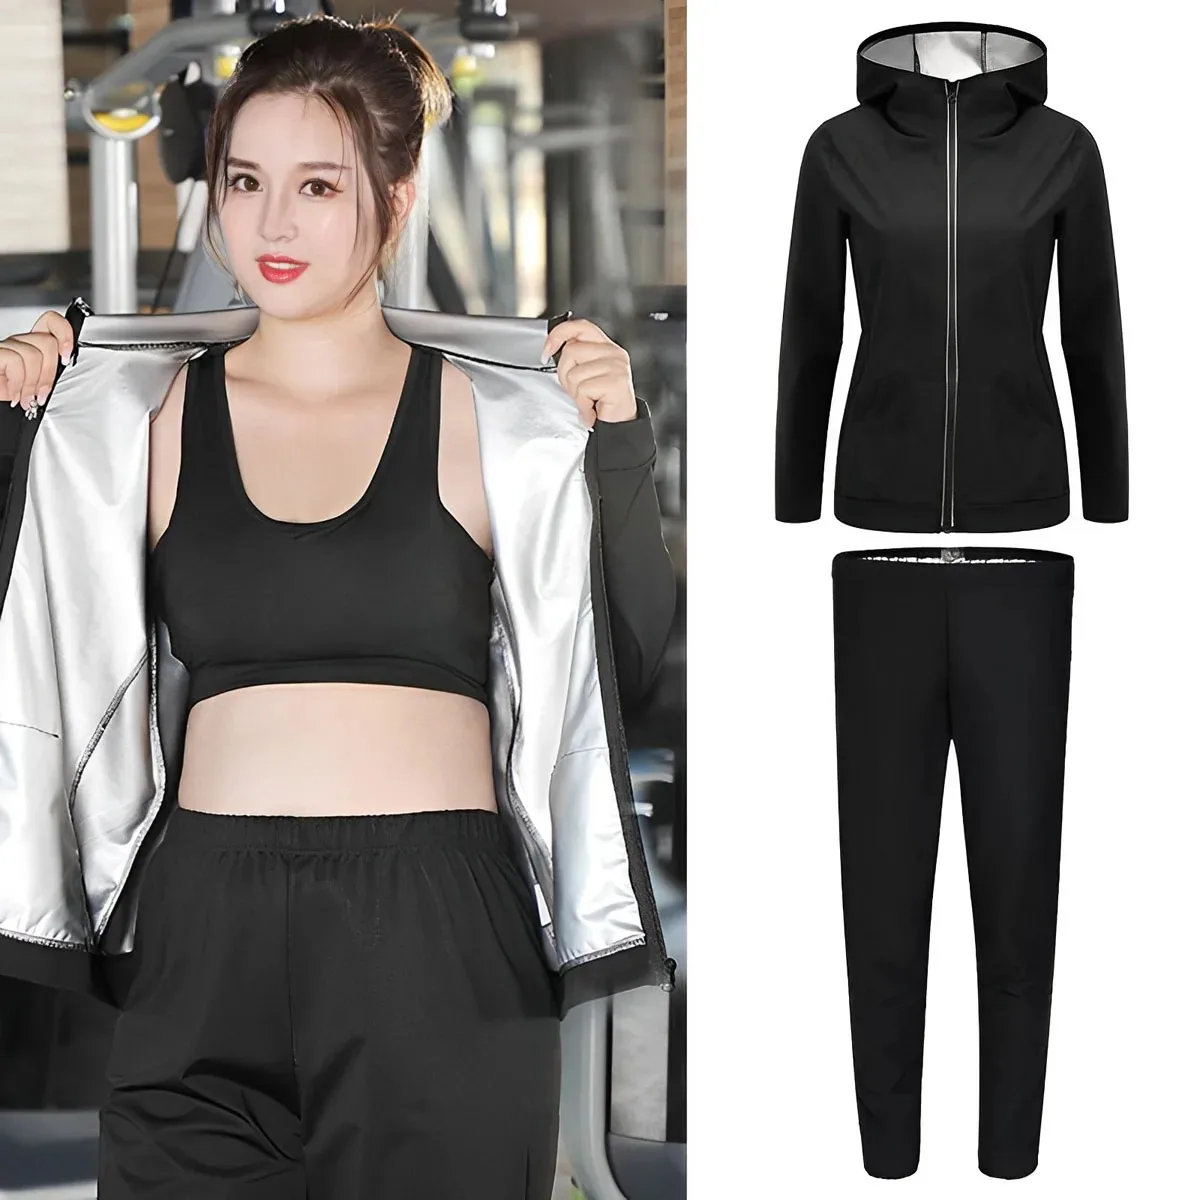 

Women Sauna Suit Weight Loss Sweating Clothes Quick Dry Gym Fitness Sportwear Sets Female Slimming Tracksuit